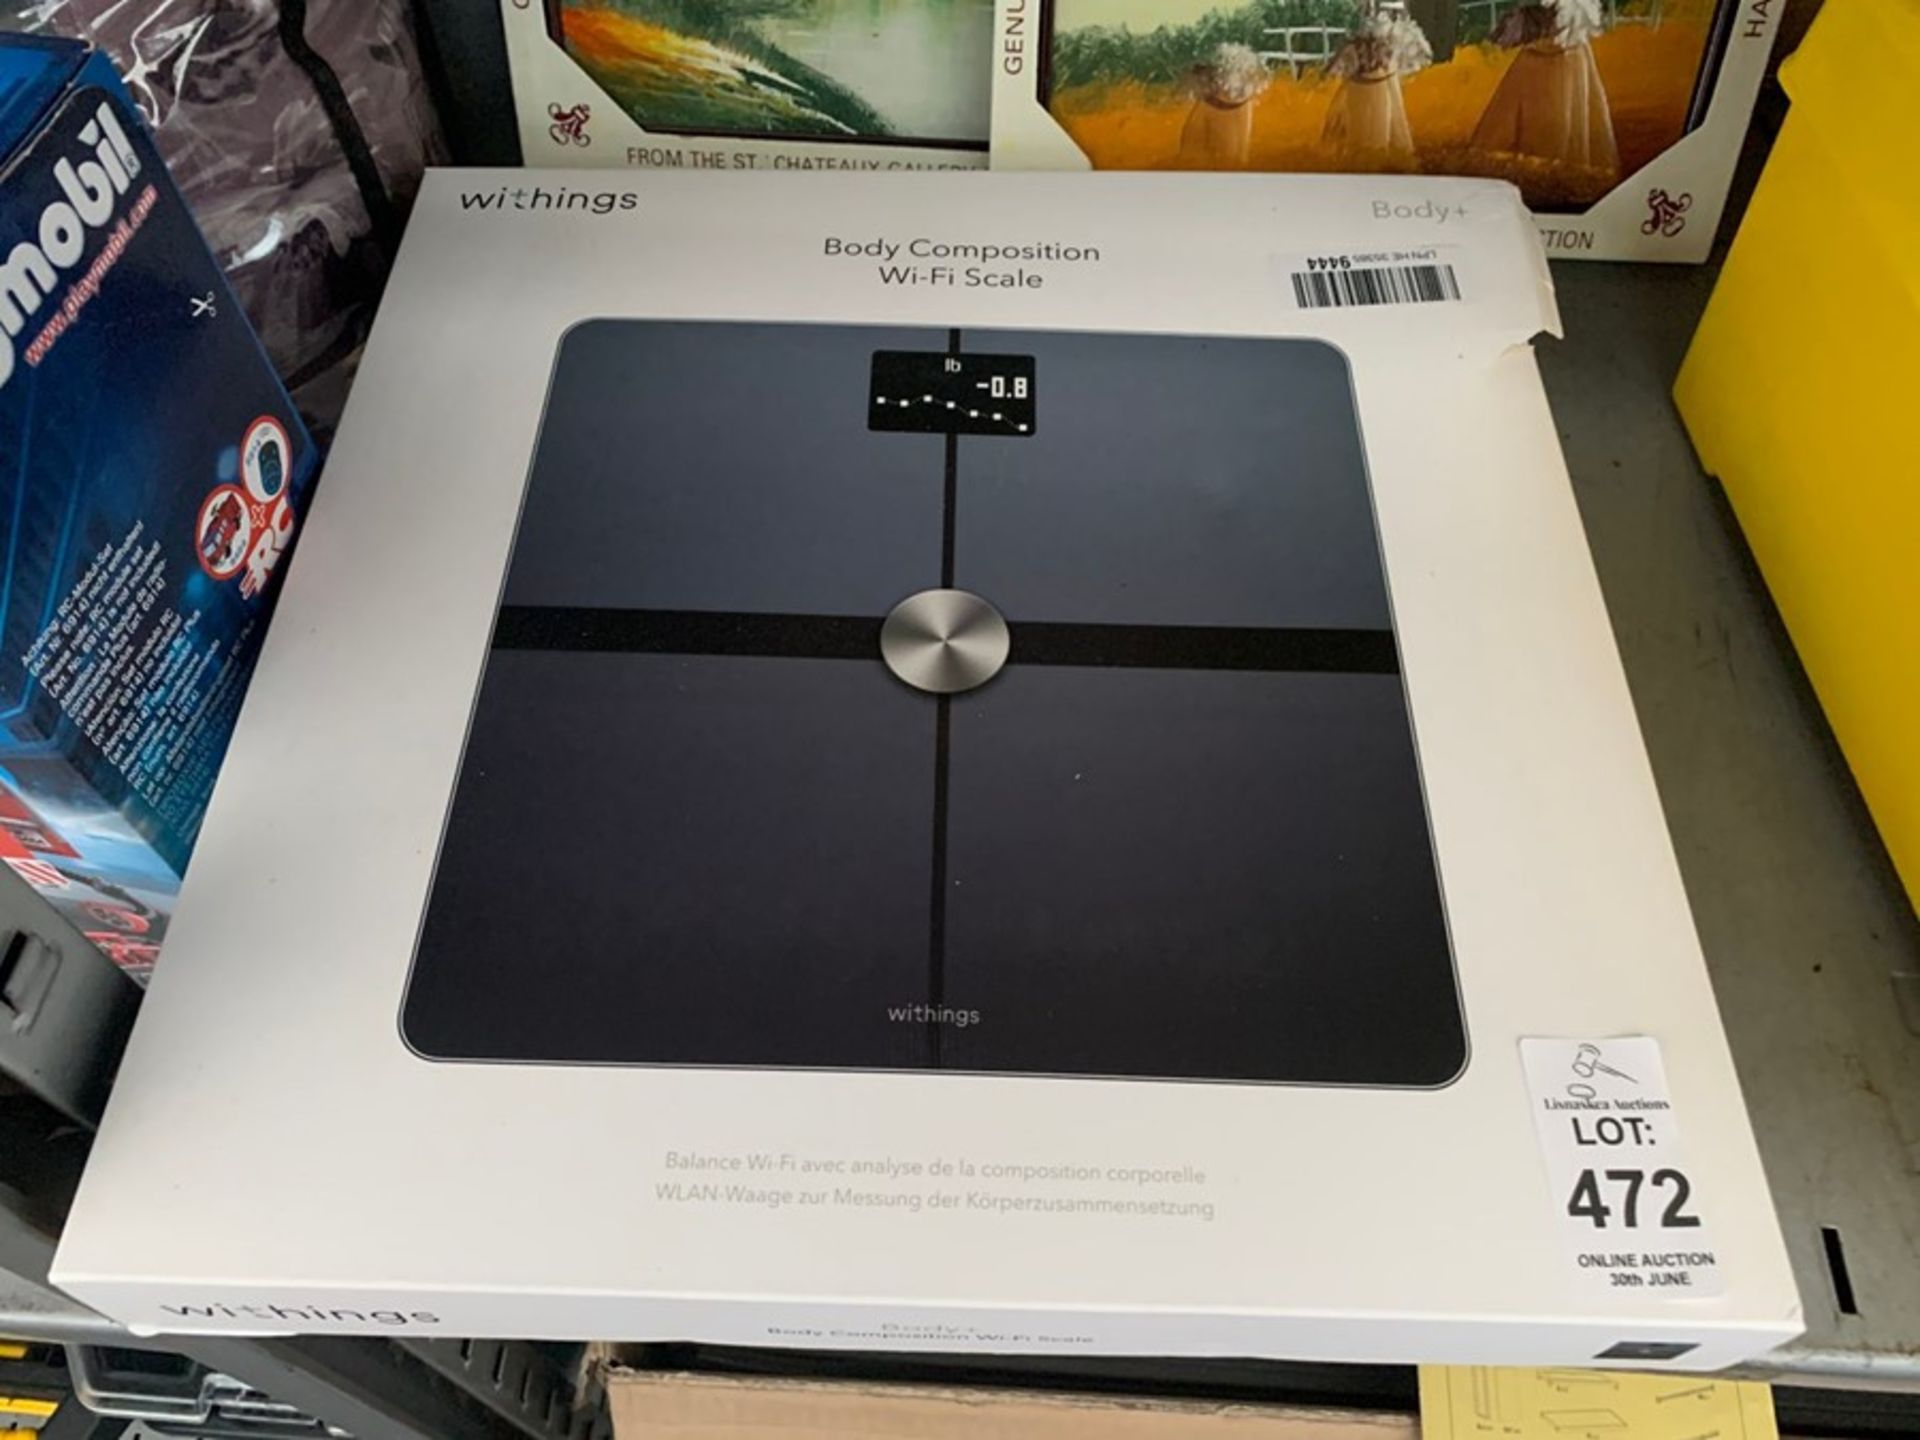 WITHINGS BODY COMPOSITION WI-FI SCALE